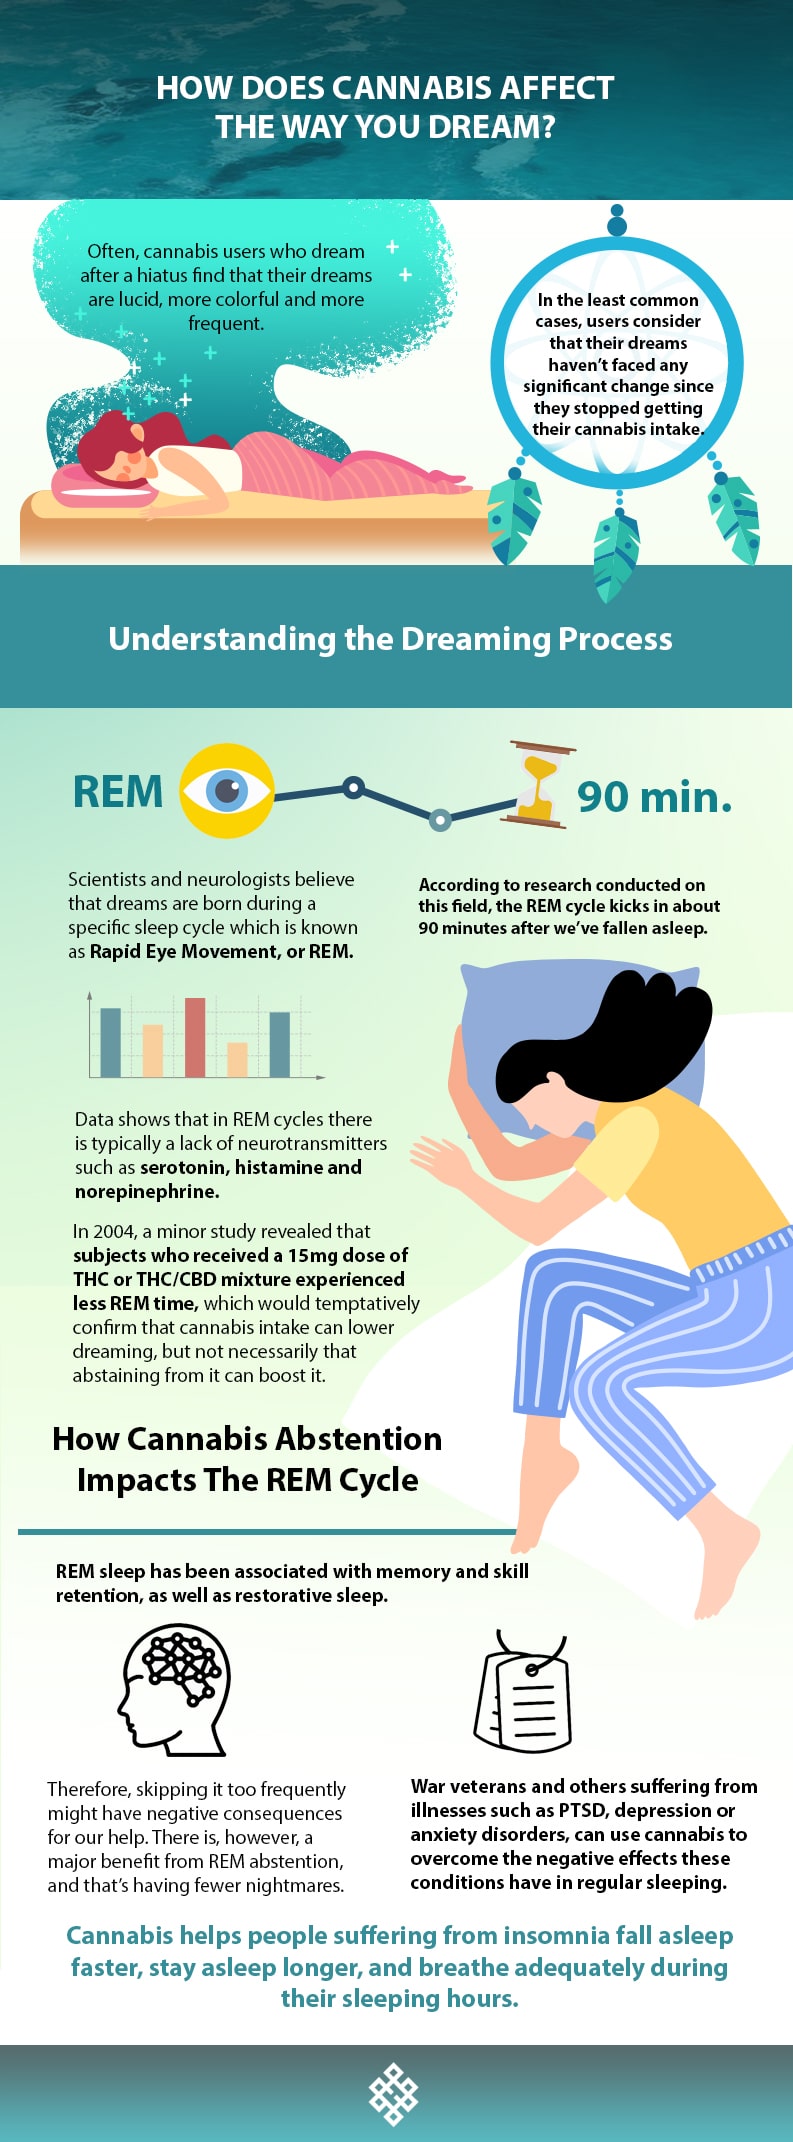 Dream, How Does Cannabis Affect The Way You Dream?